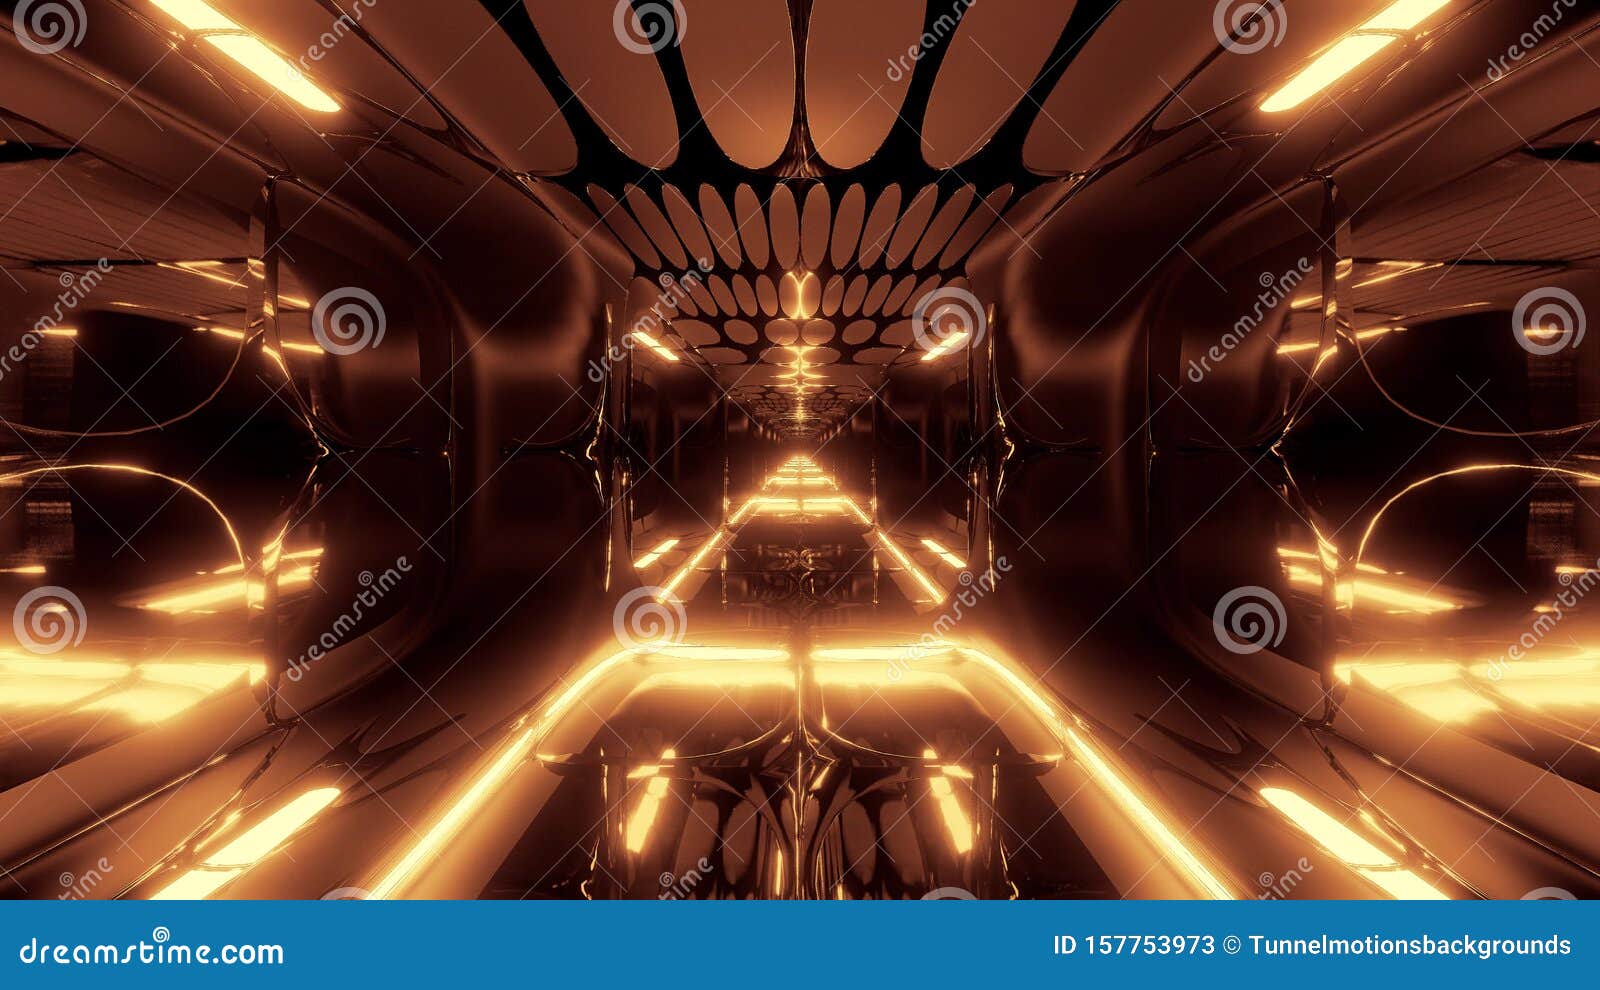 Glowing Futuristic Horror Sci-fi Temple with Nice Reflection 3d  Illustration Wallpaper Background Design Stock Illustration - Illustration  of horror, endless: 157753973